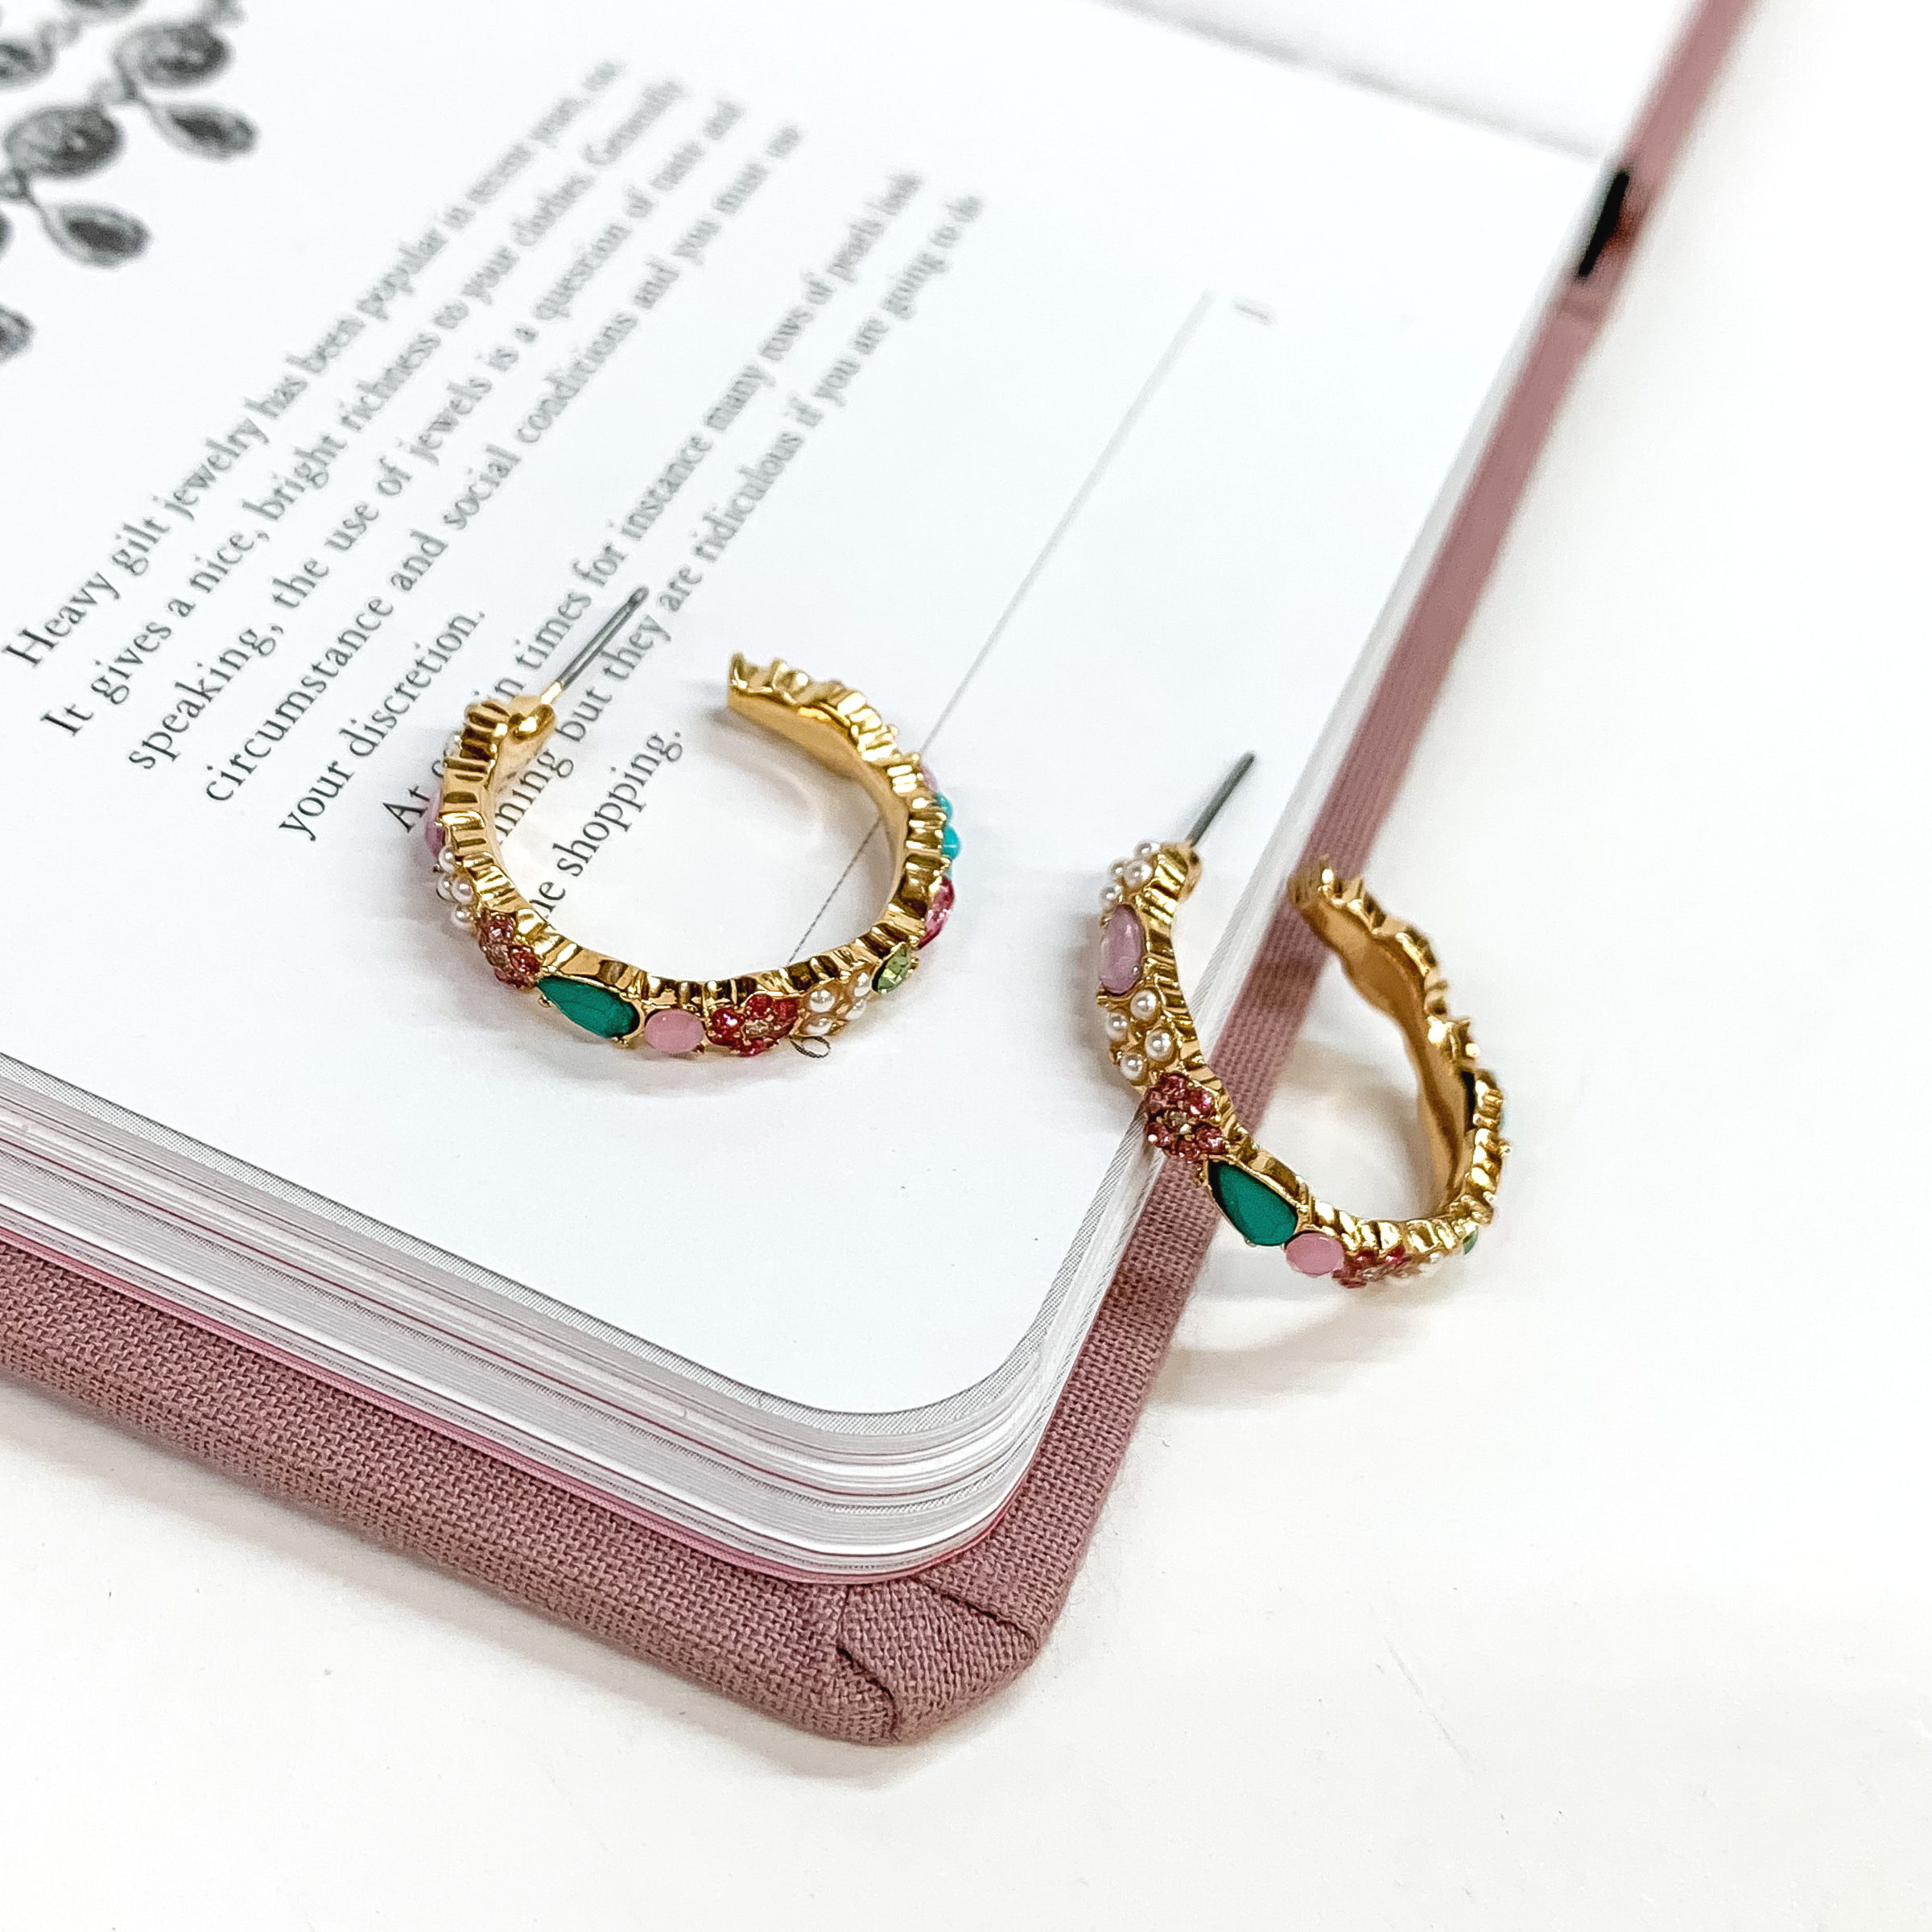 Gold Tone Hoop Earrings with Multicolor Crystals - Giddy Up Glamour Boutique